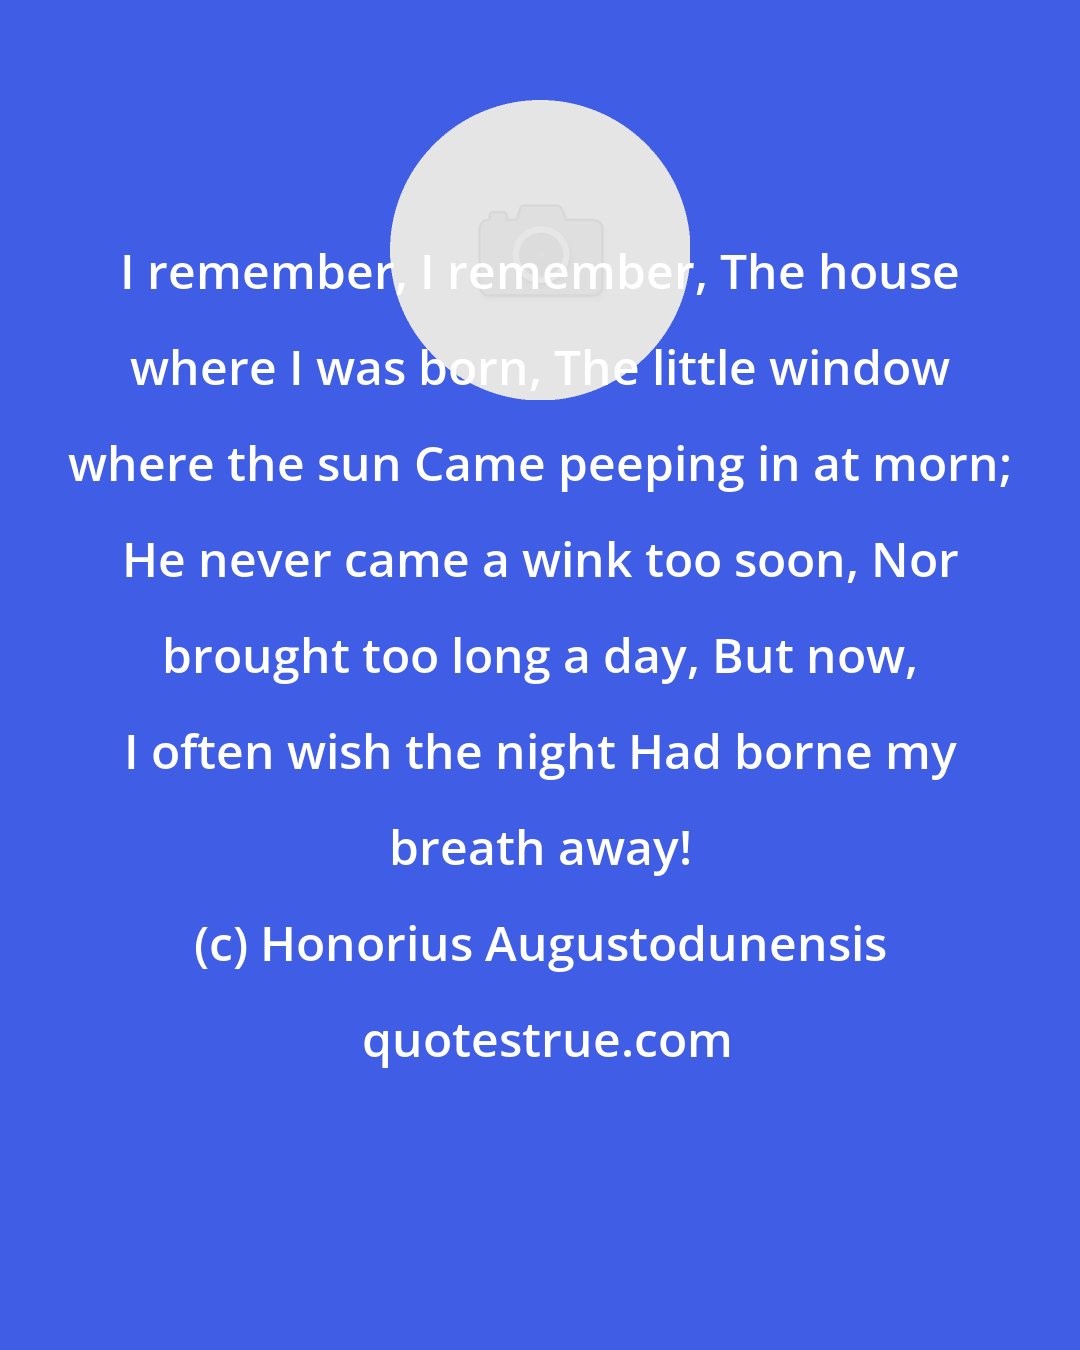 Honorius Augustodunensis: I remember, I remember, The house where I was born, The little window where the sun Came peeping in at morn; He never came a wink too soon, Nor brought too long a day, But now, I often wish the night Had borne my breath away!